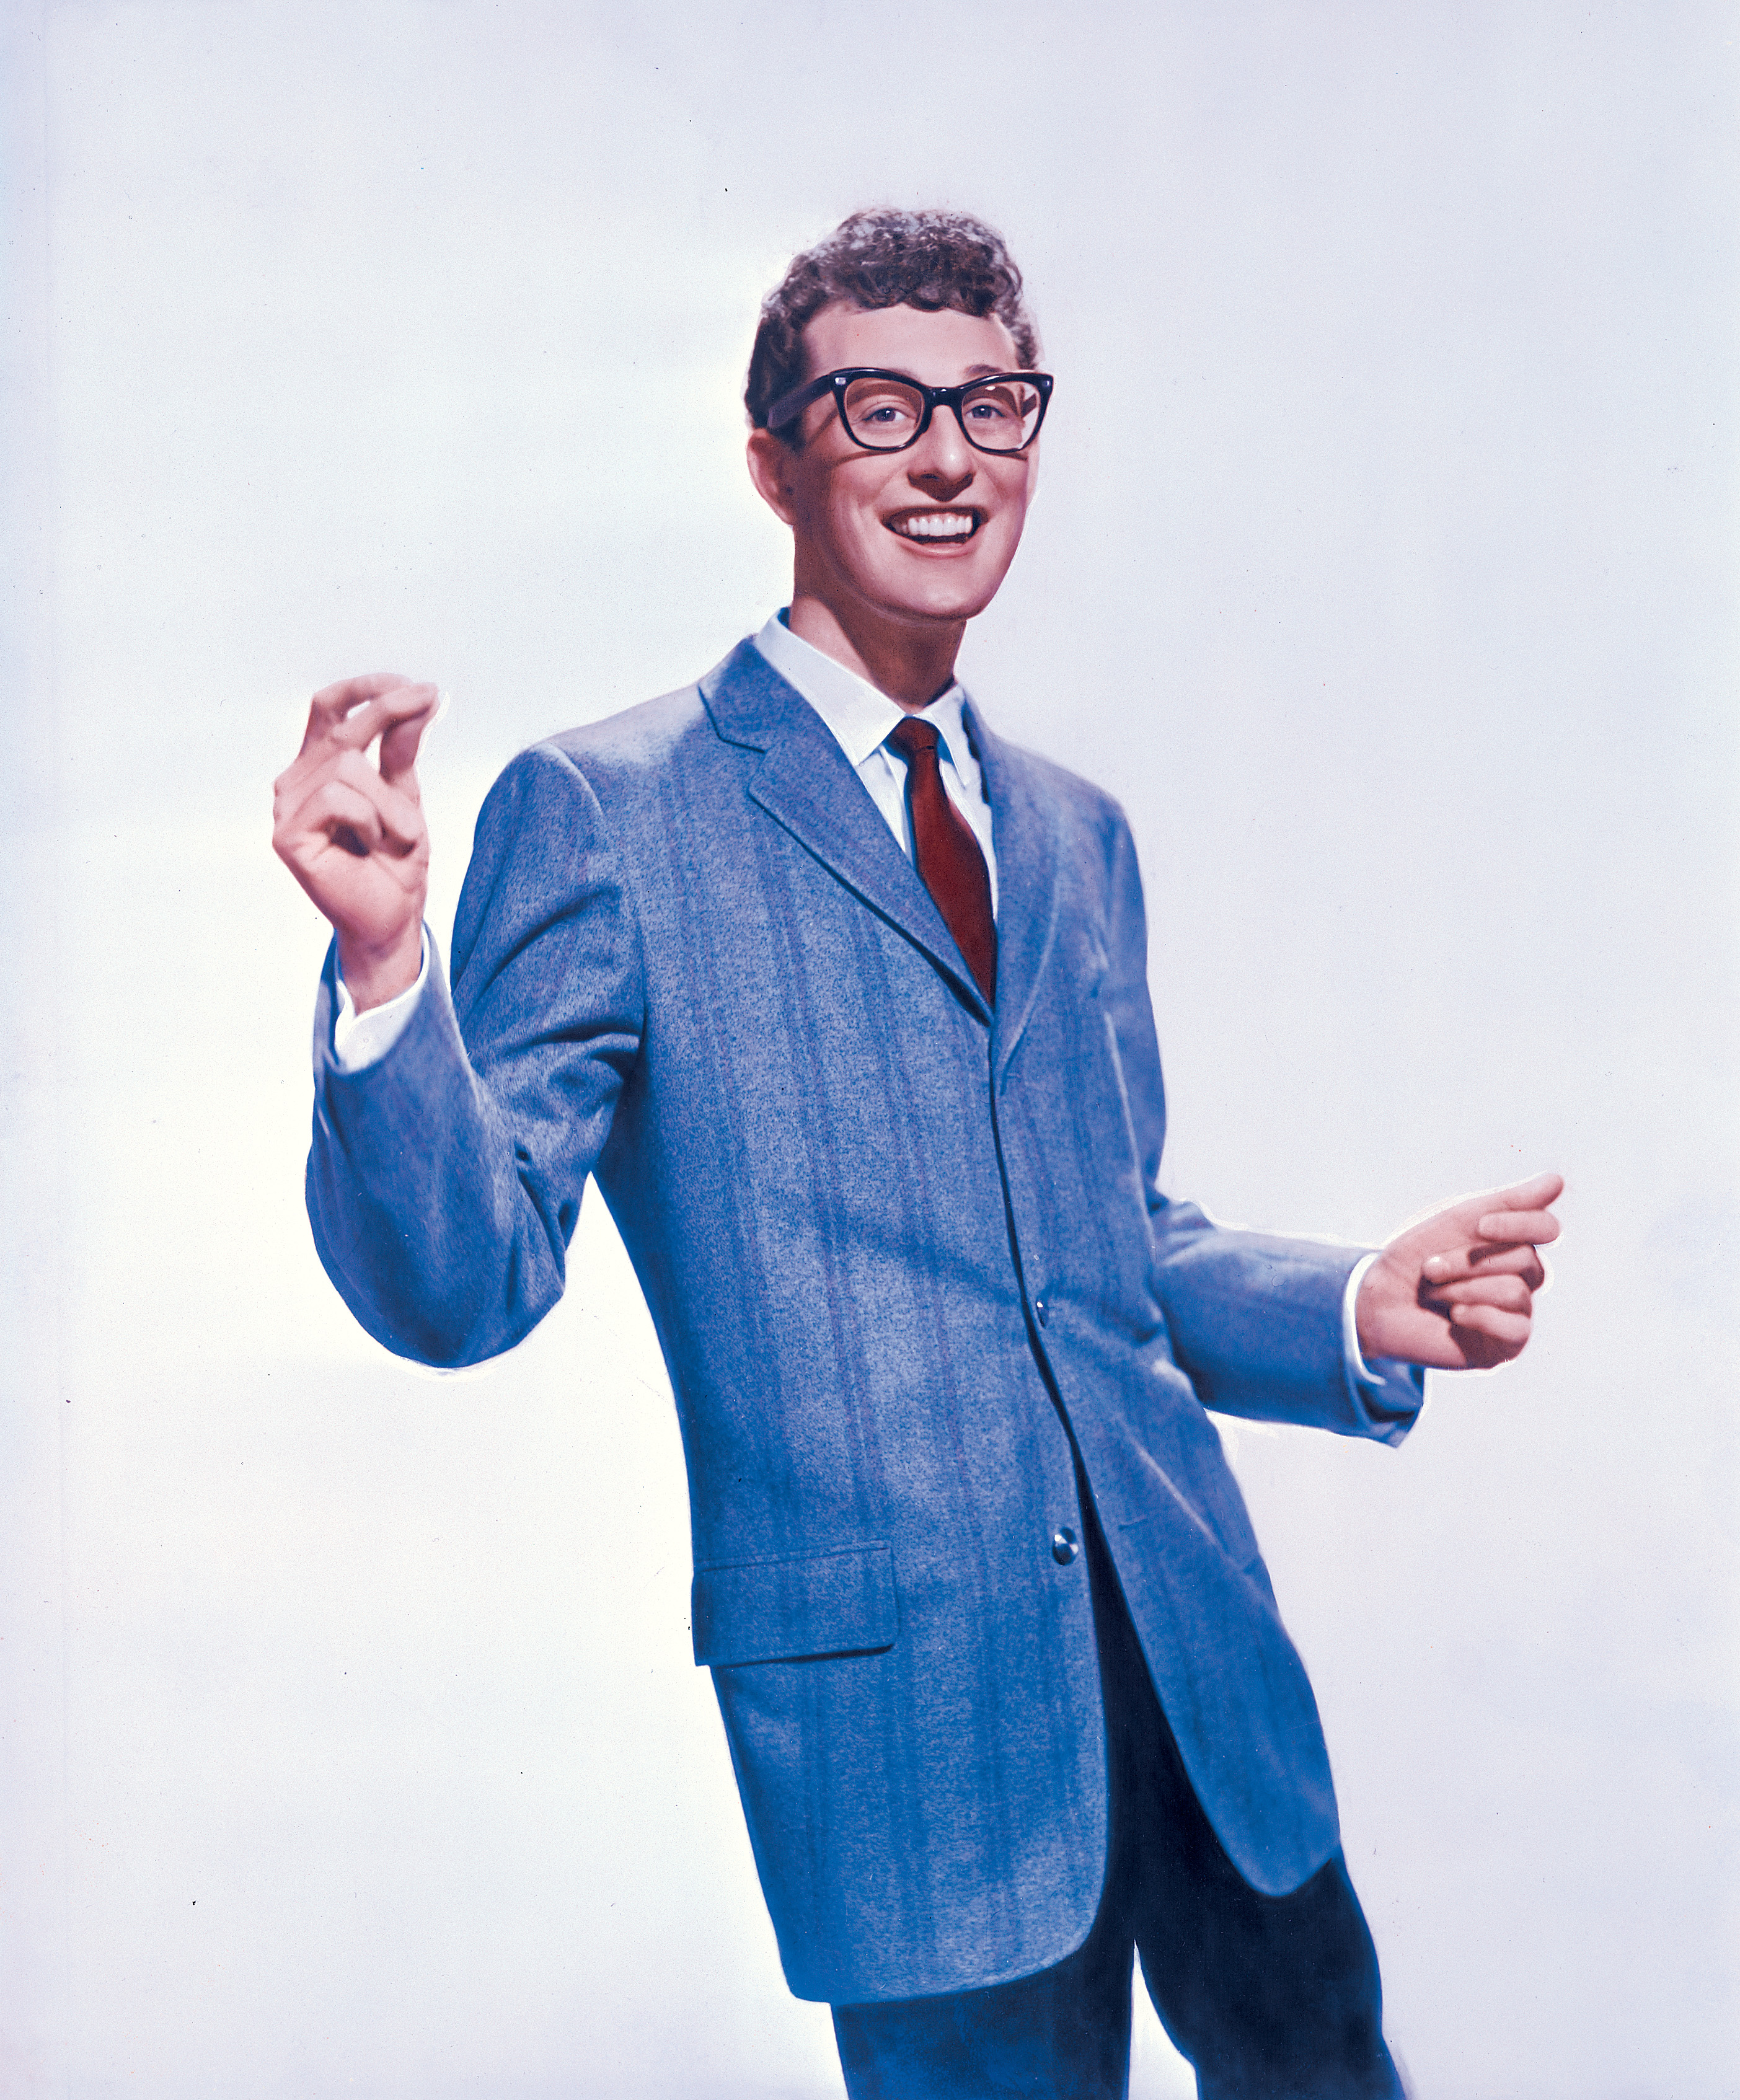 Photo of Buddy Holly courtesy of Universal Music Group